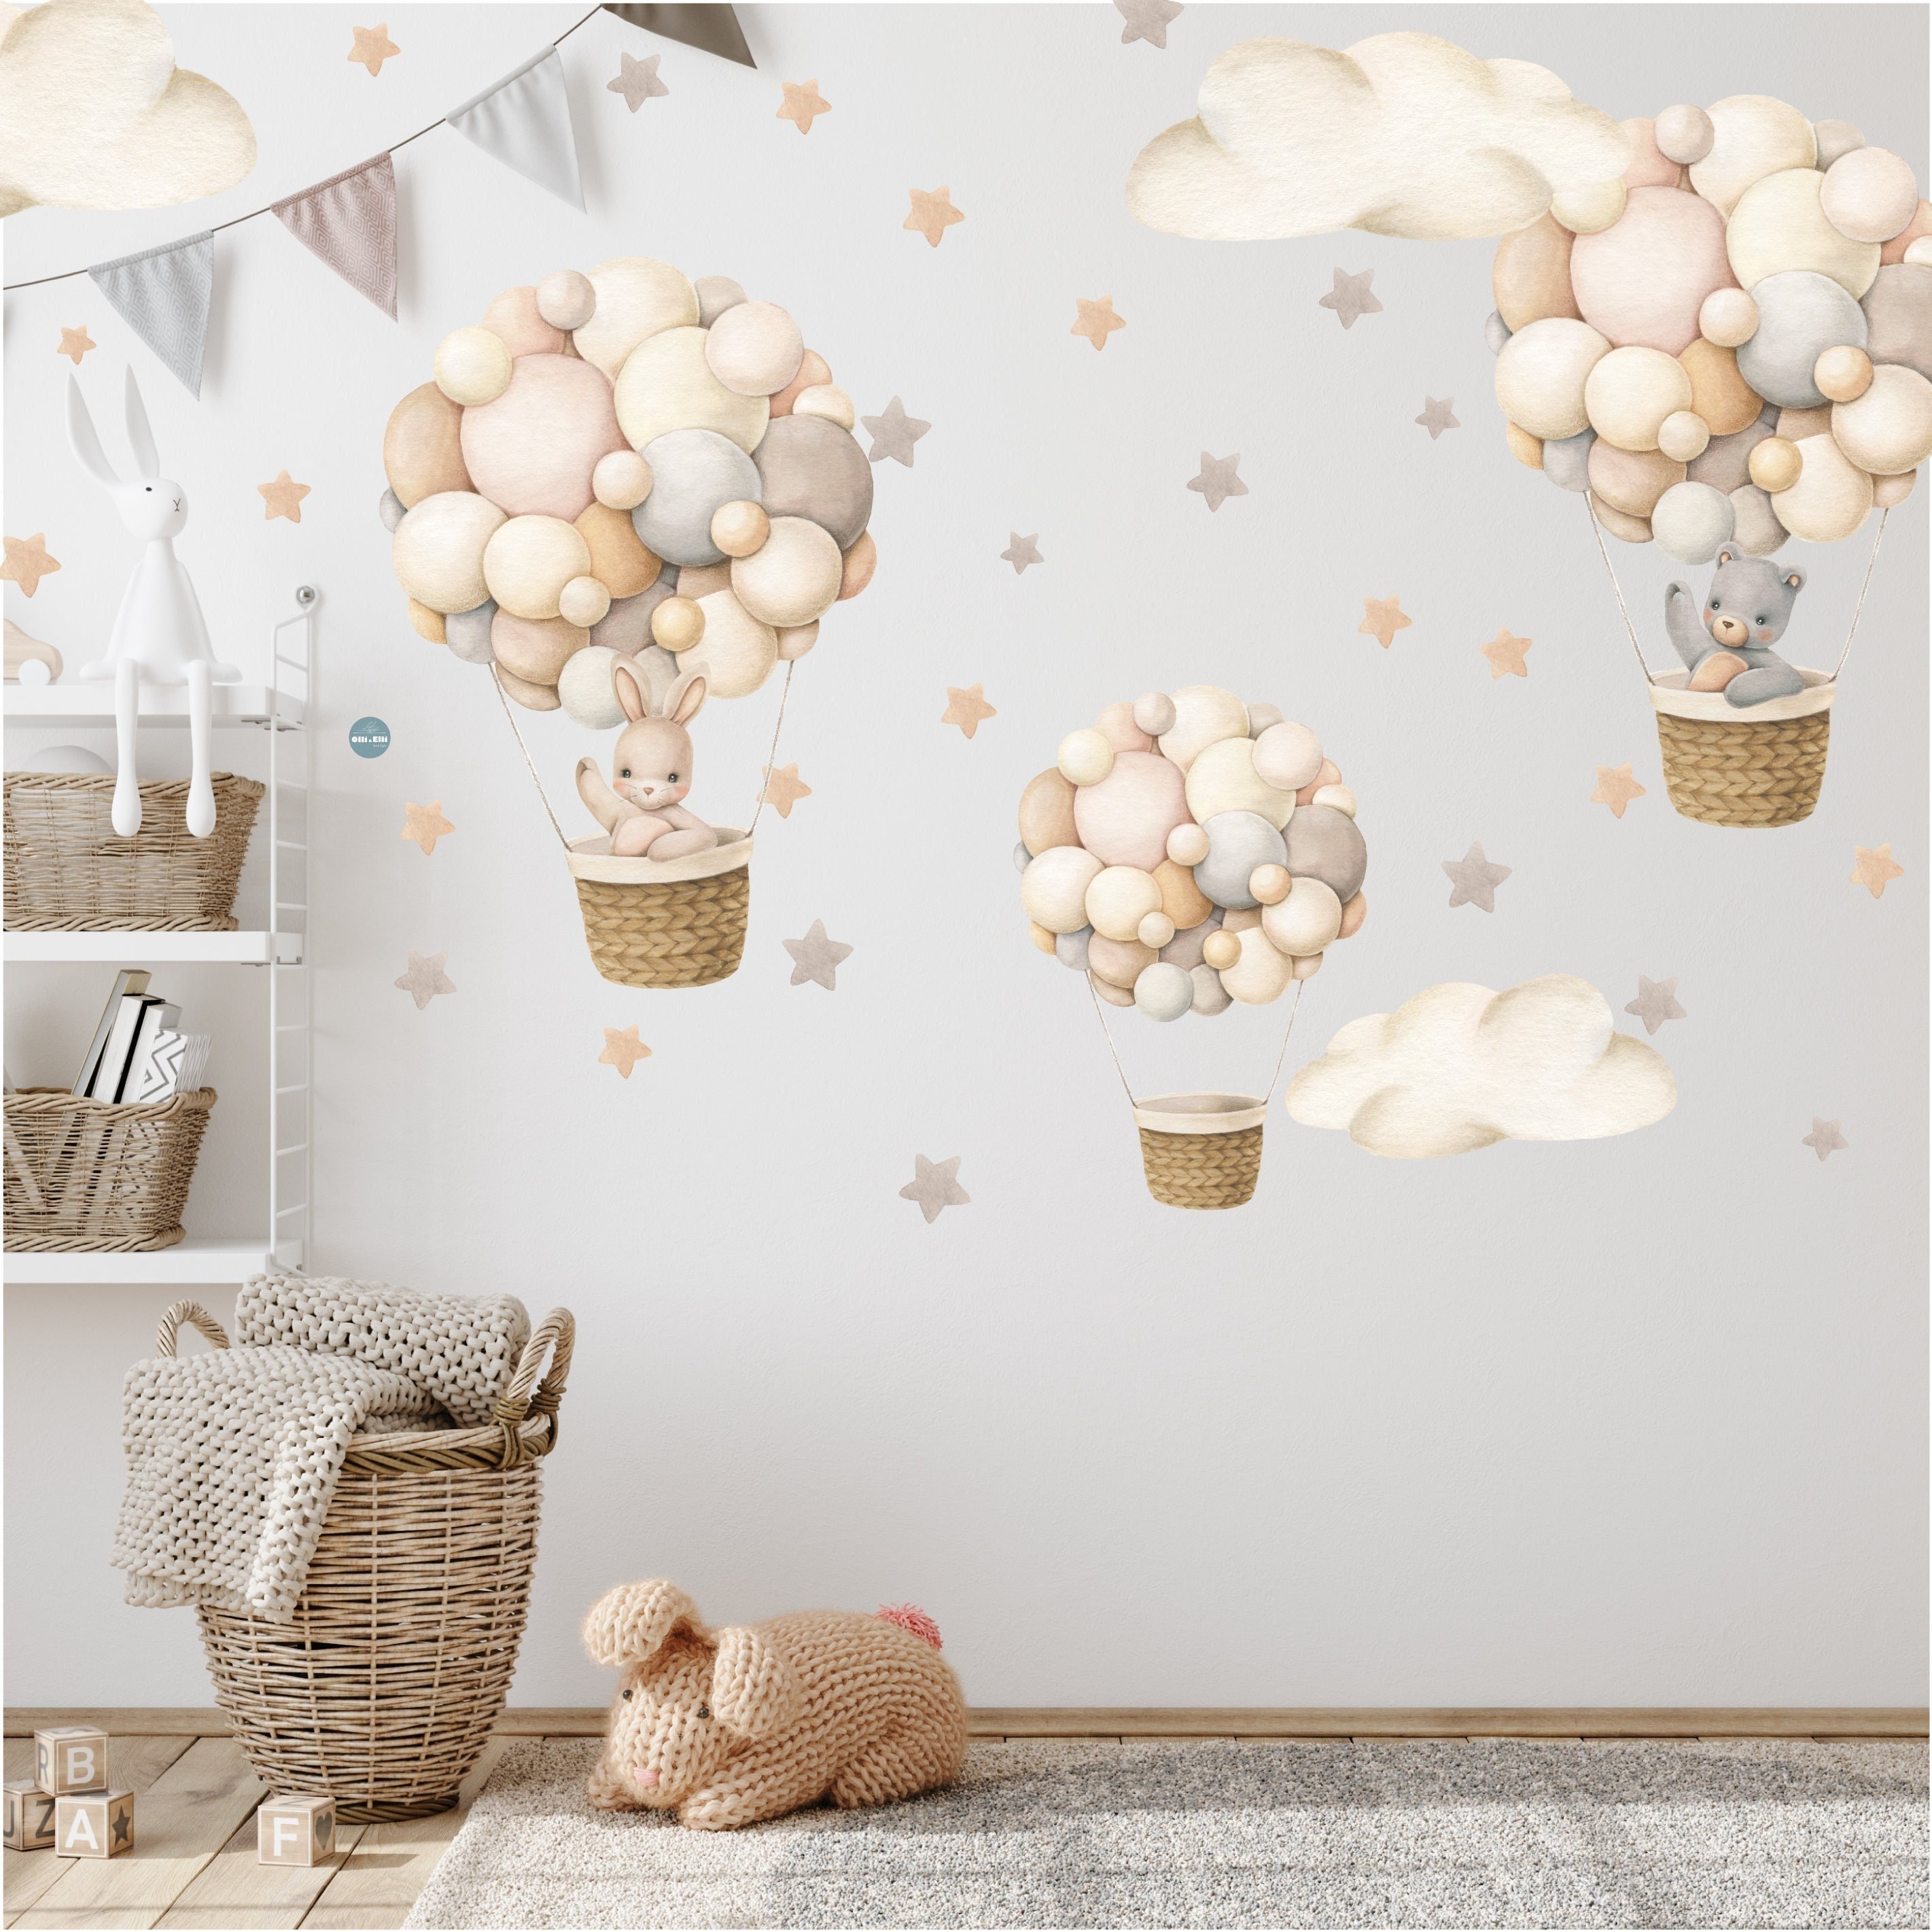 Decoration Supplies, Balloons Tools, Wall Stickers